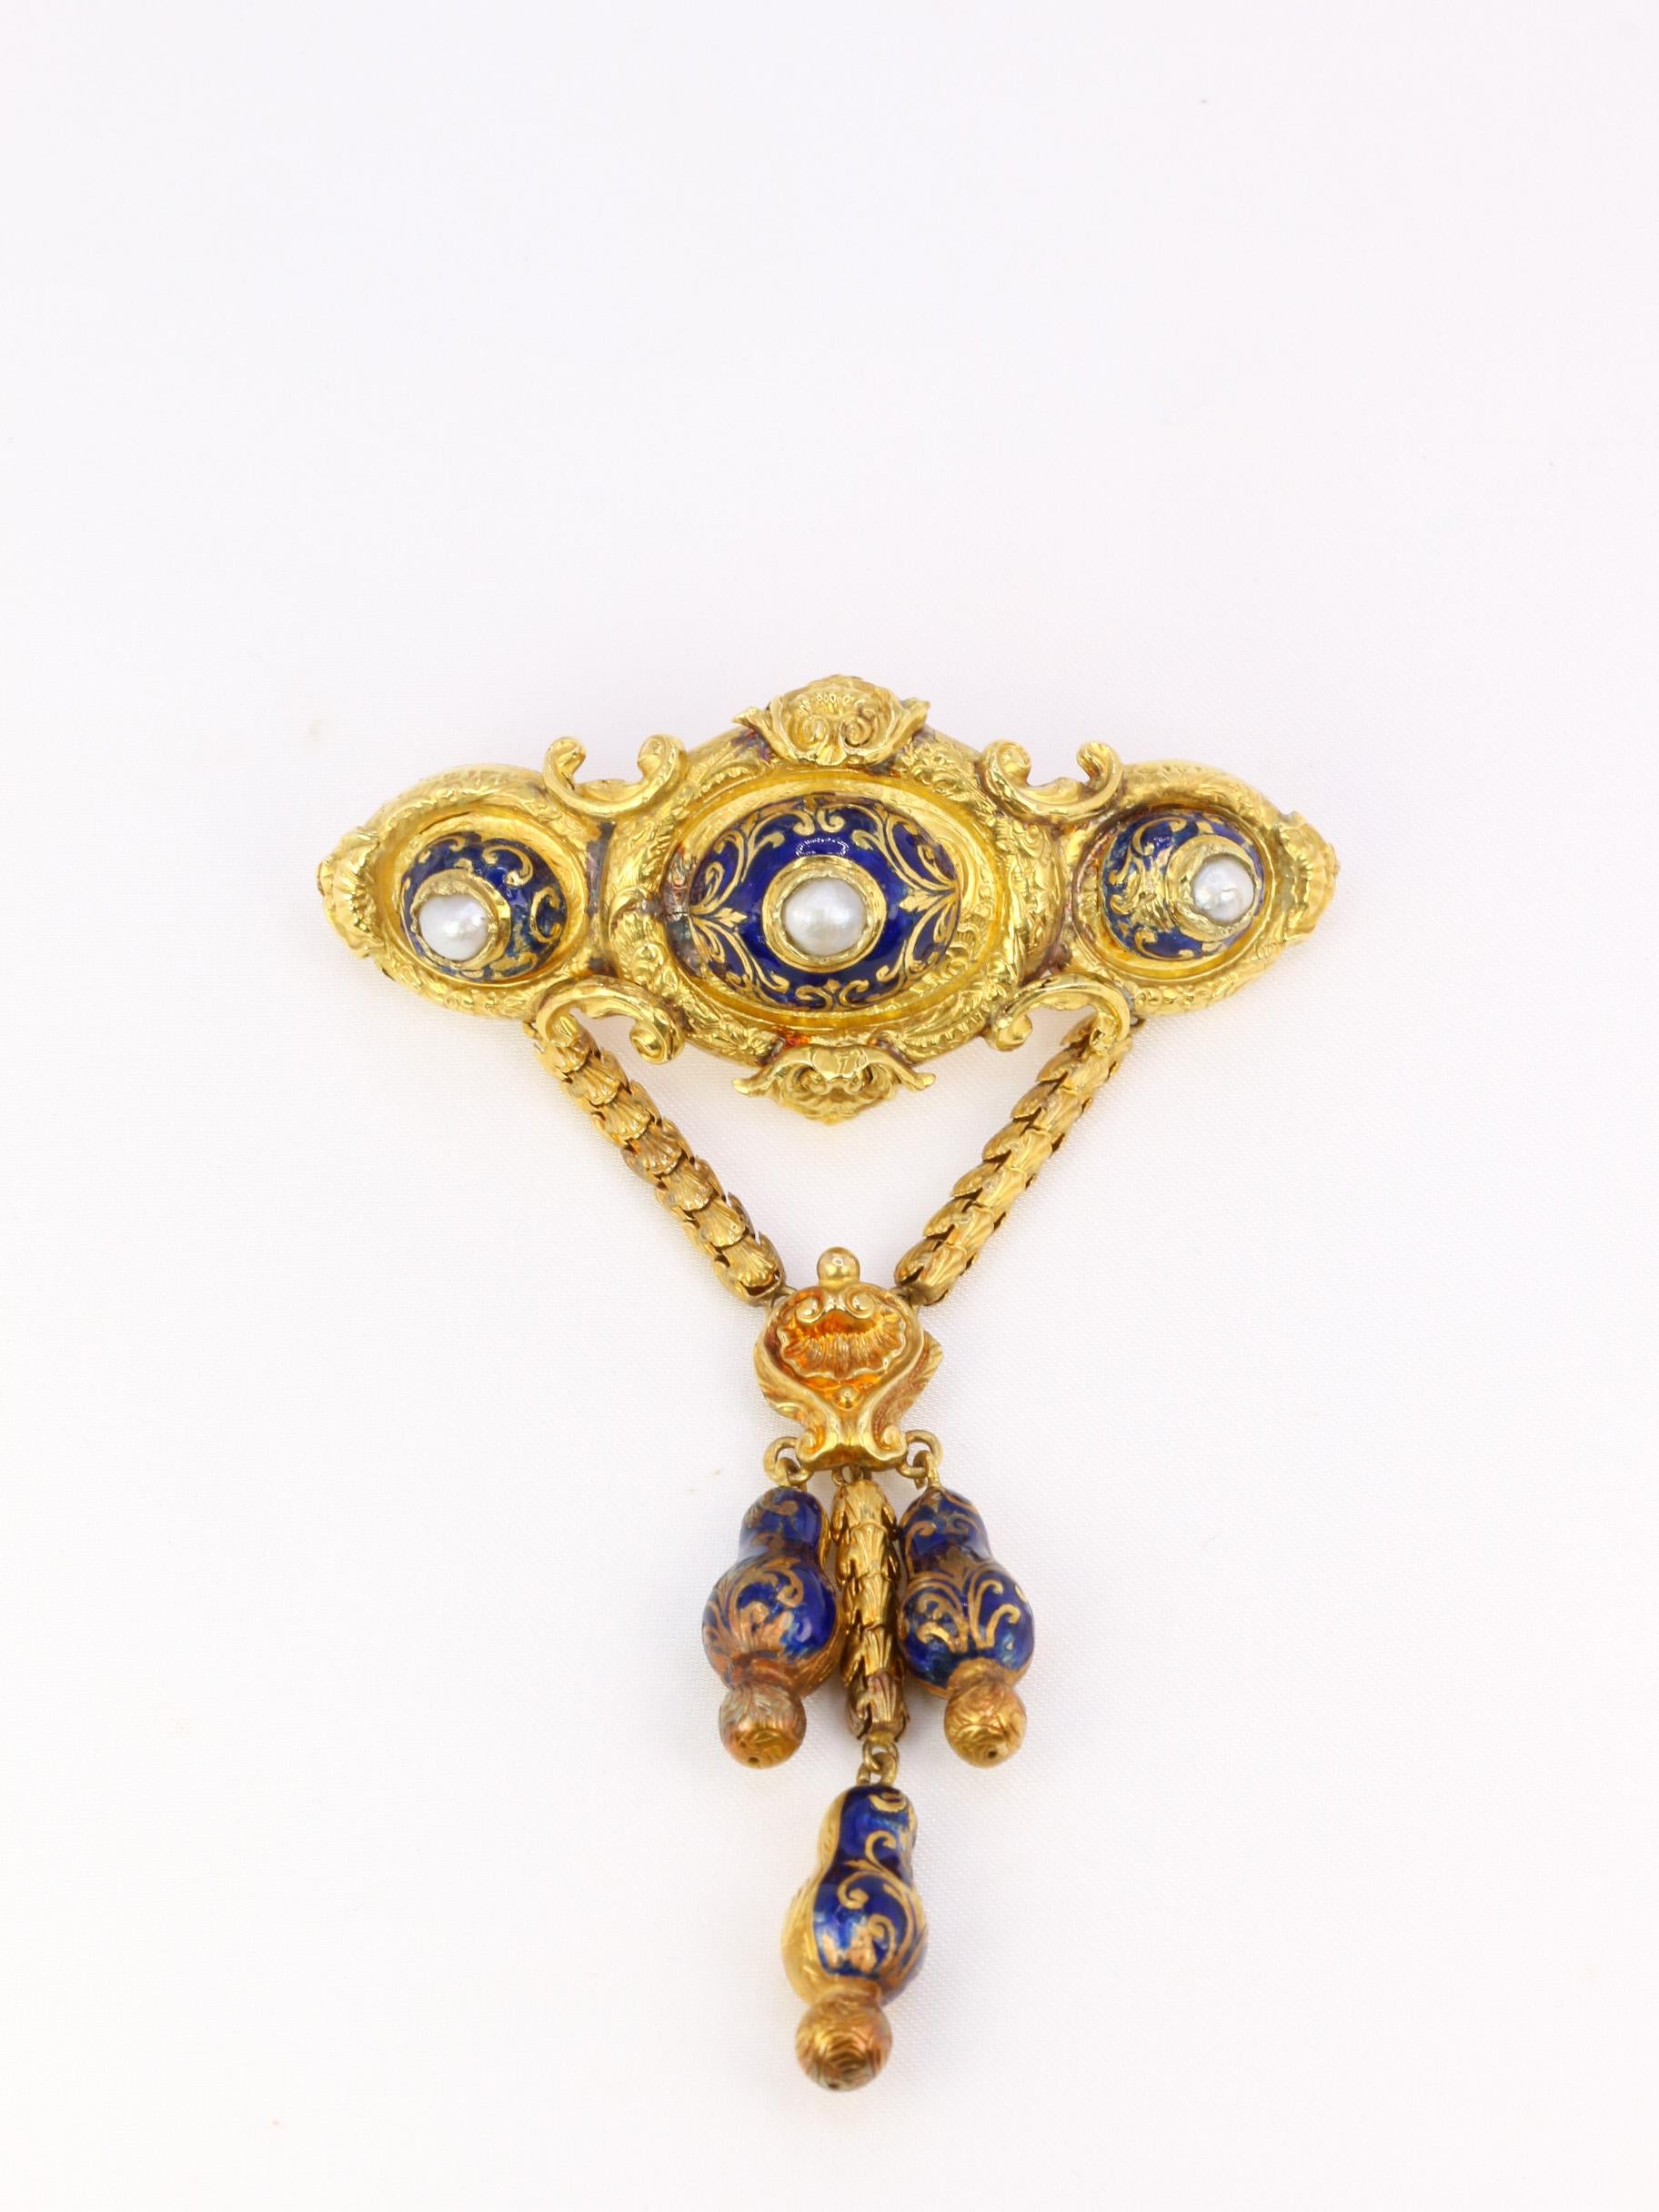 18Kt (750°/°°) yellow gold victorian brooch featuring an upper element decorated with arabesques and foliage and three oval parts enhanced with blue enamel and each centered with a fine gray pearl. This element supports a lower part composed of